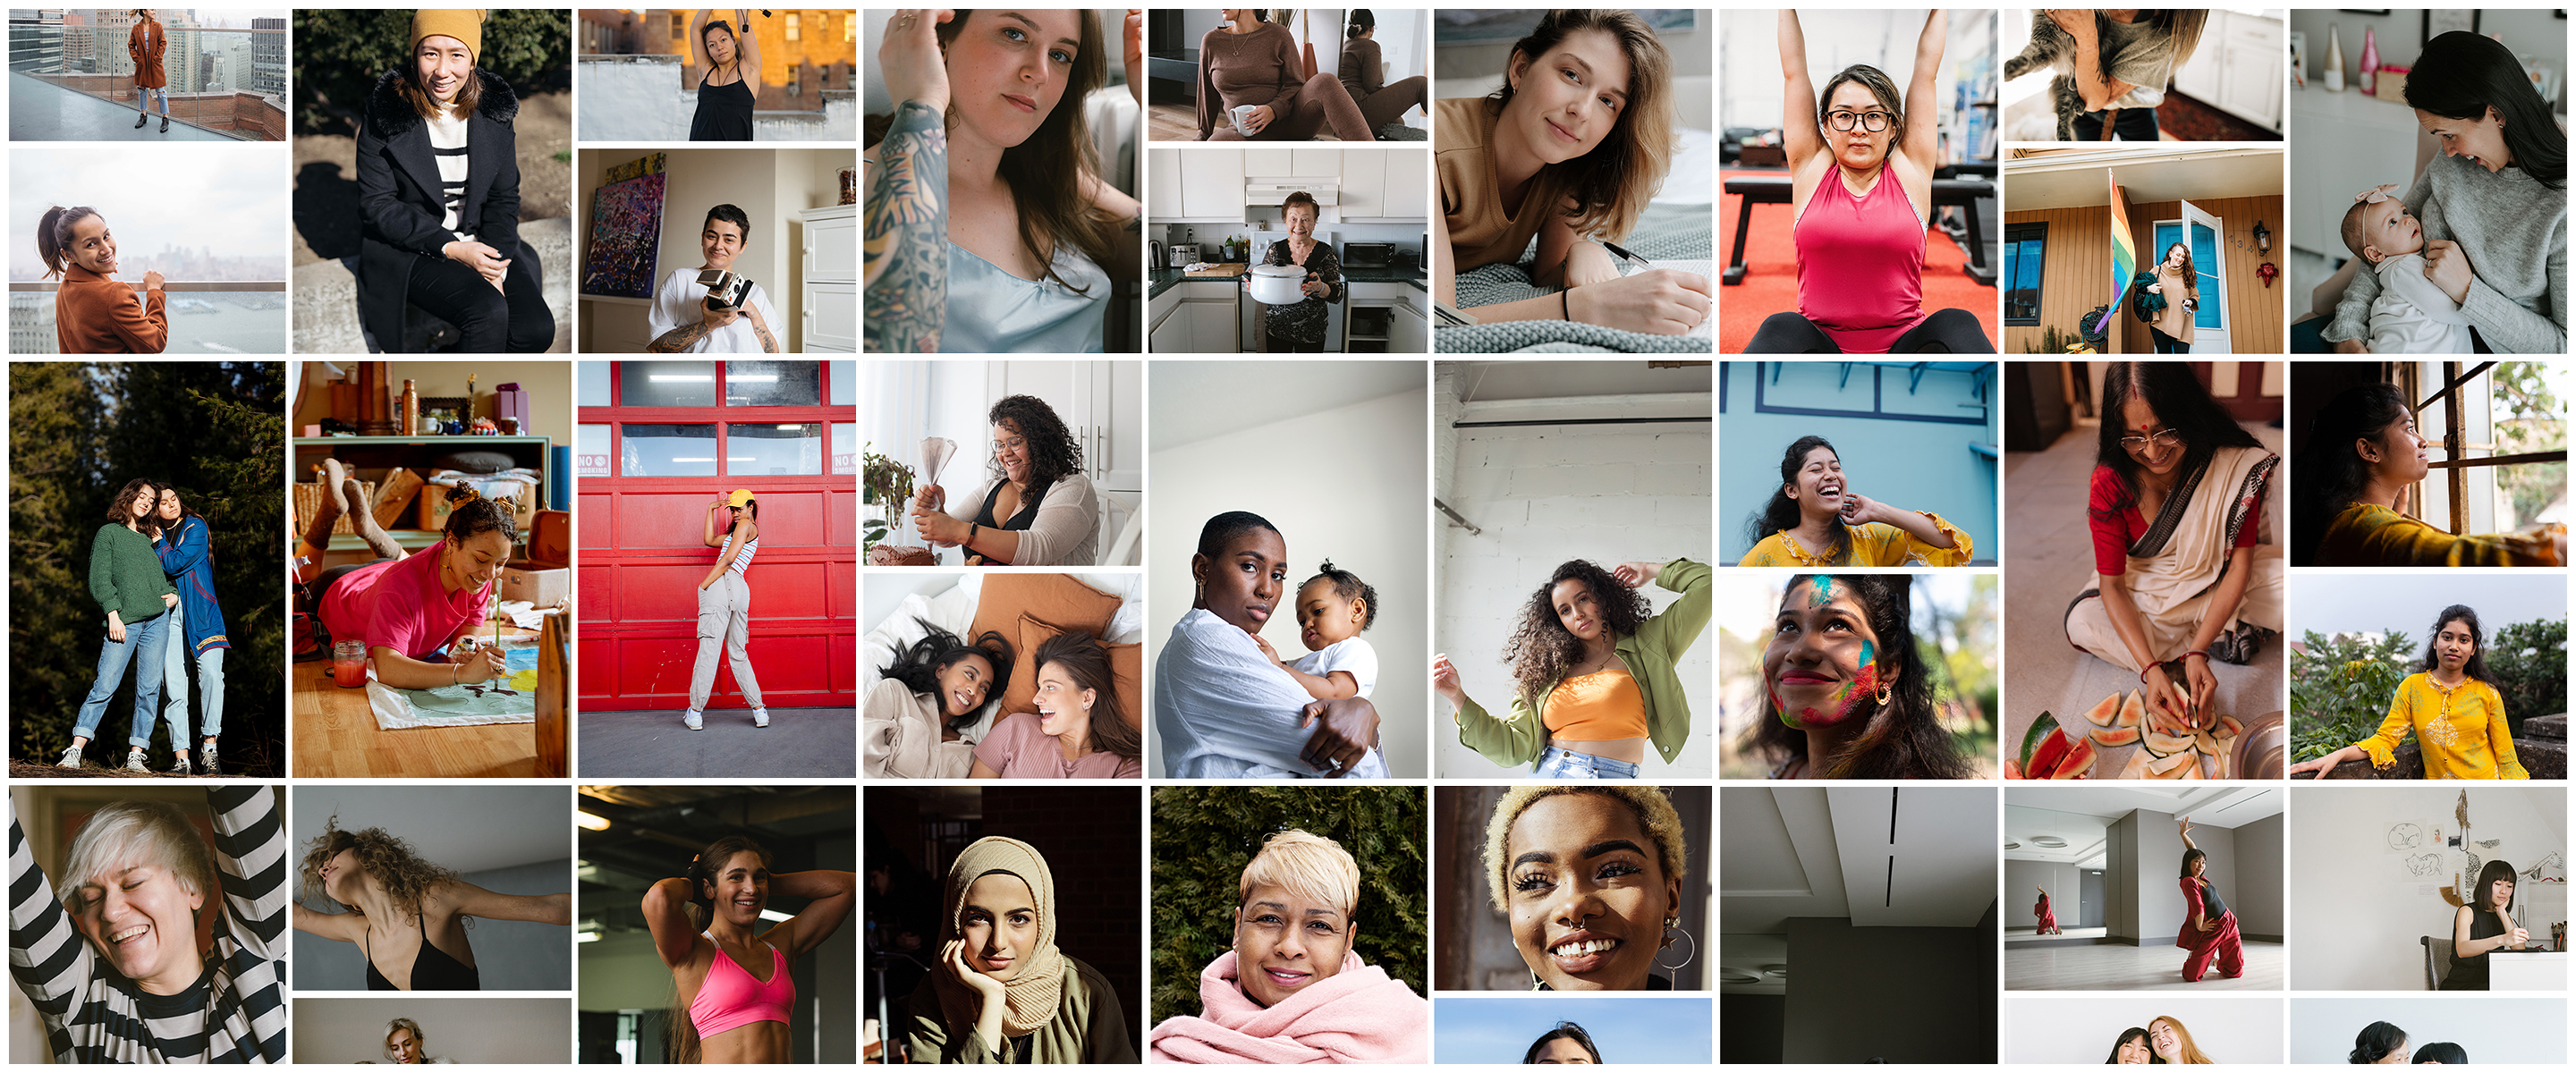 500px Commercial Grants: I am: Woman Campaign